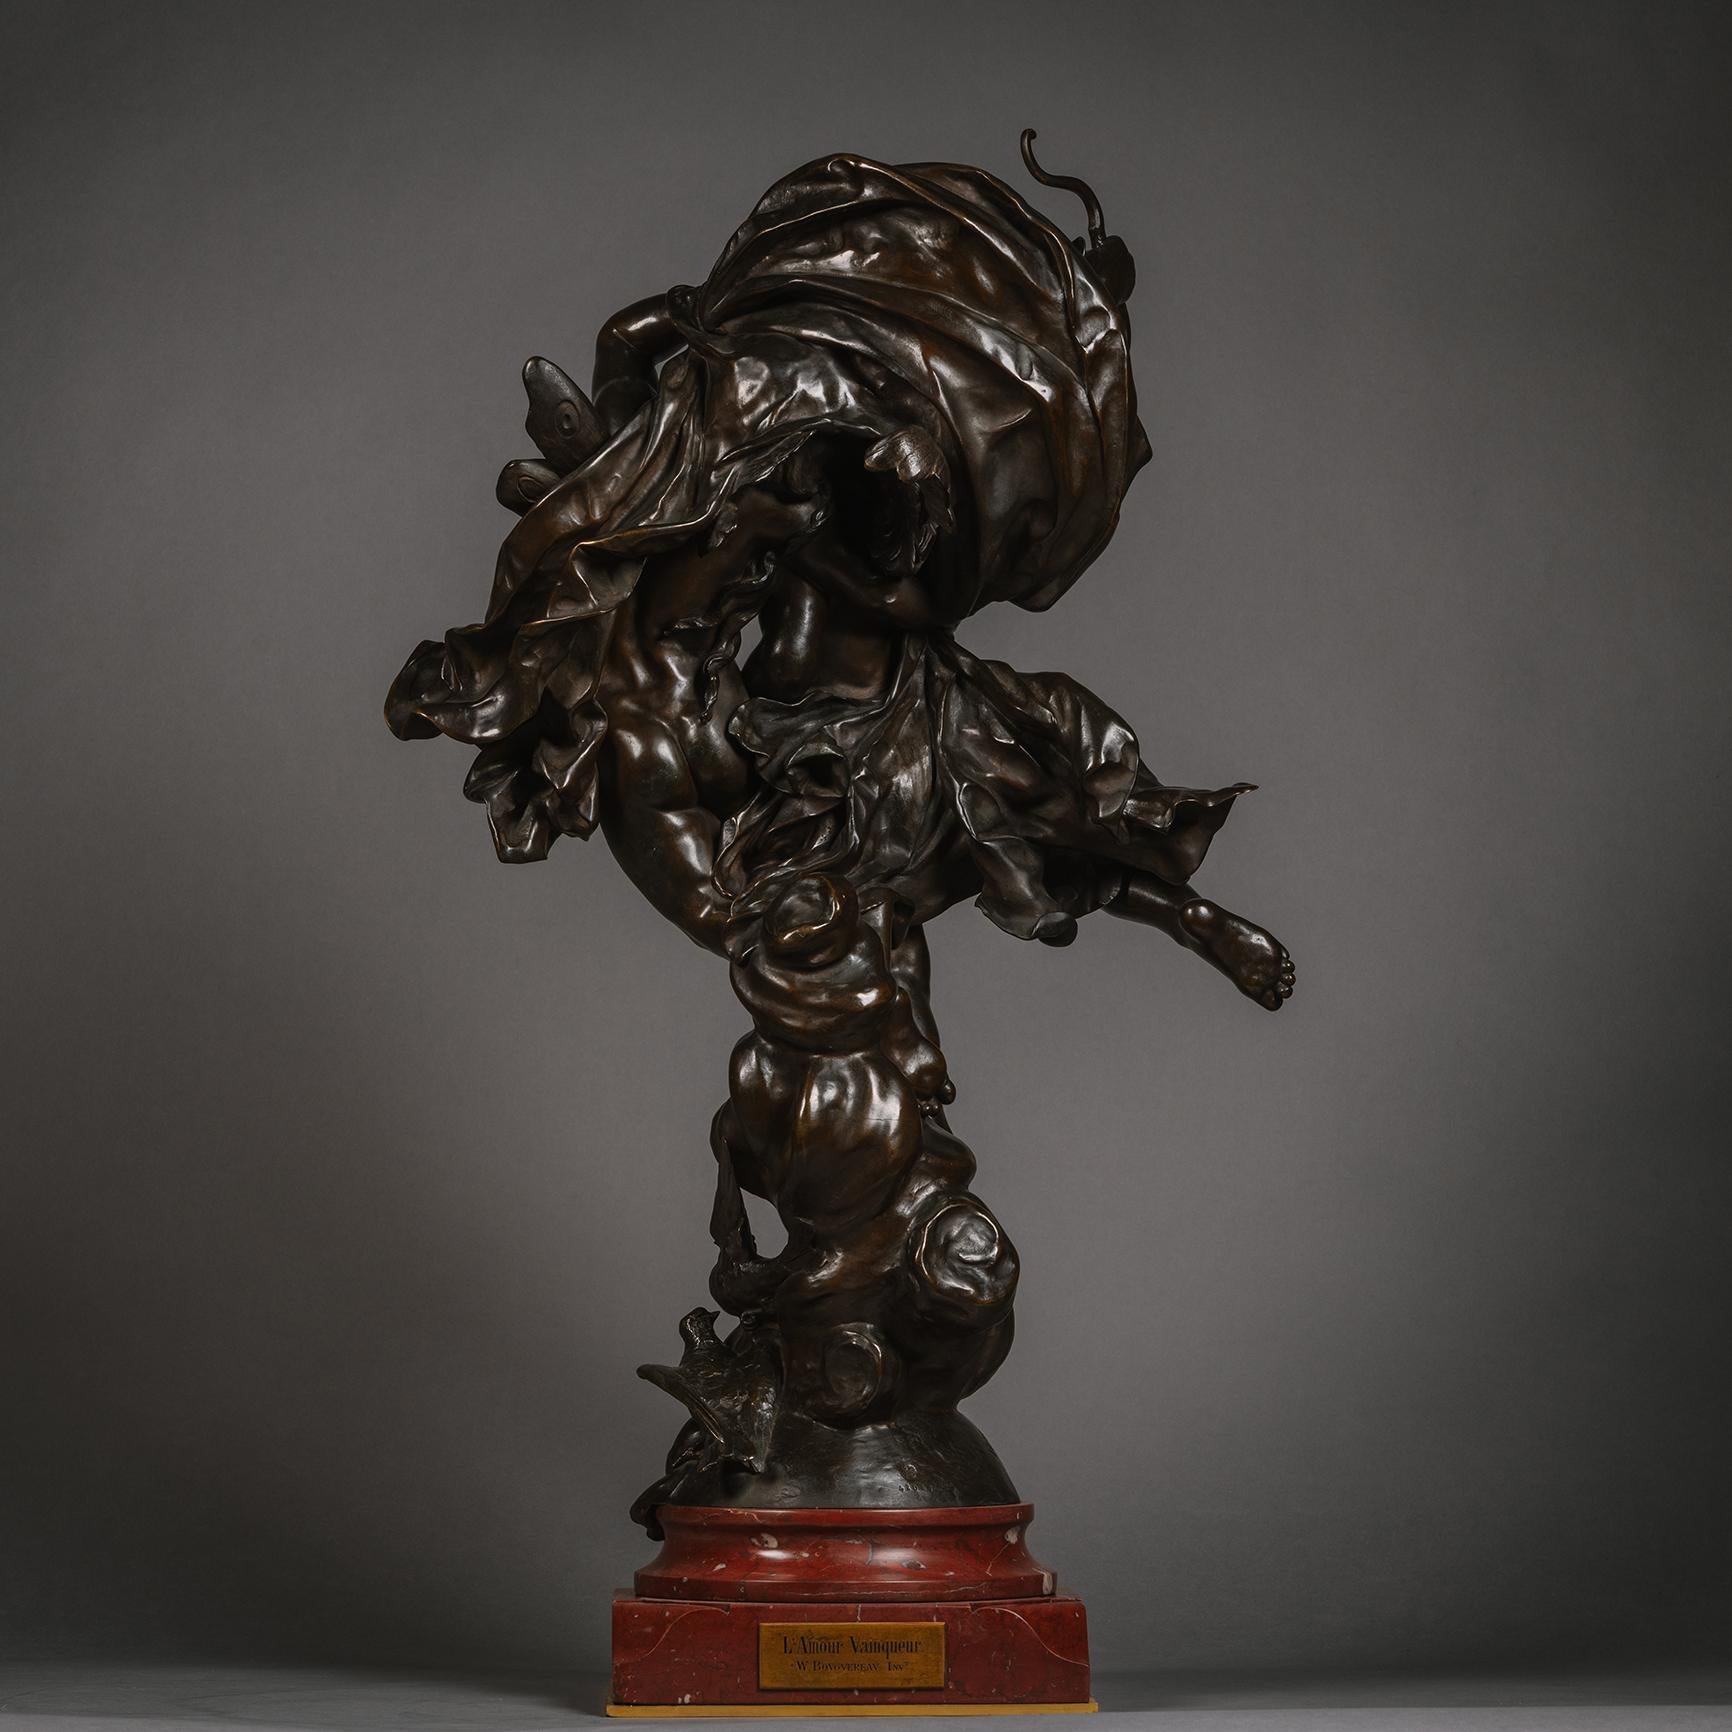 Bronze 'L'Amour Vainqueur' ('A Love Vanquished') By Adolphe Itasse (French, 1830 - 1893 For Sale